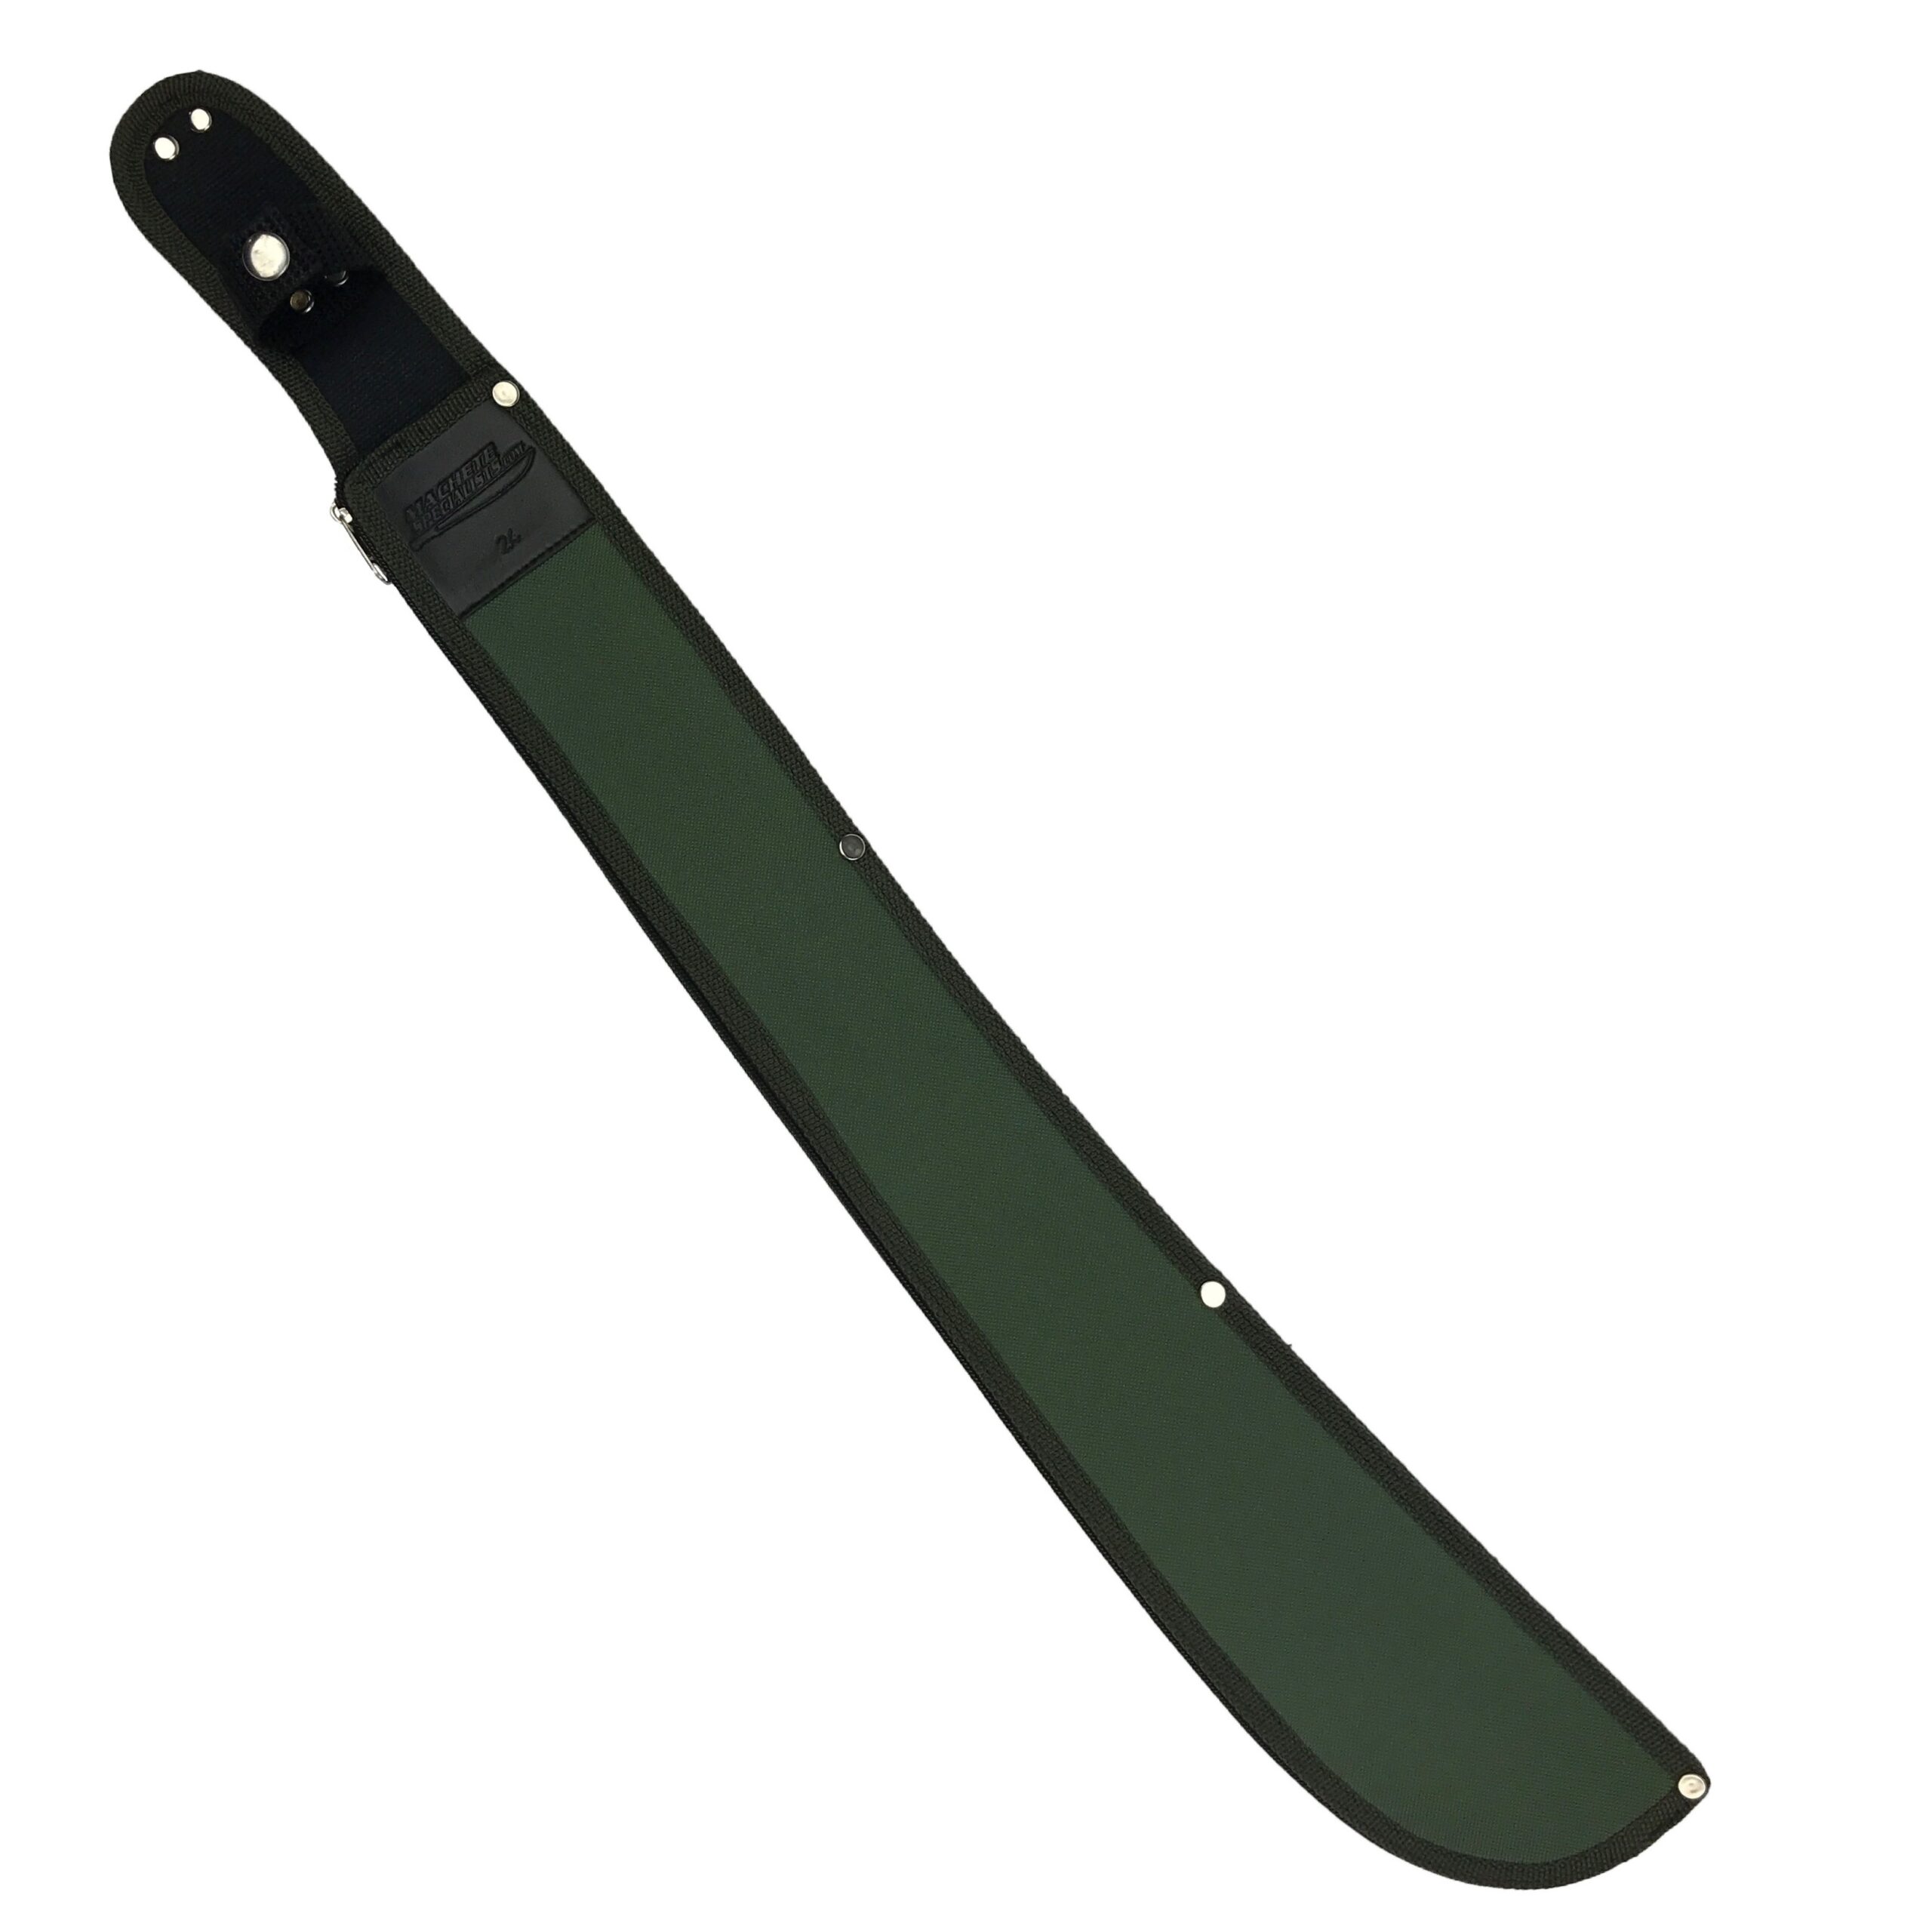 Machete Sheaths In All Sizes and Styles from